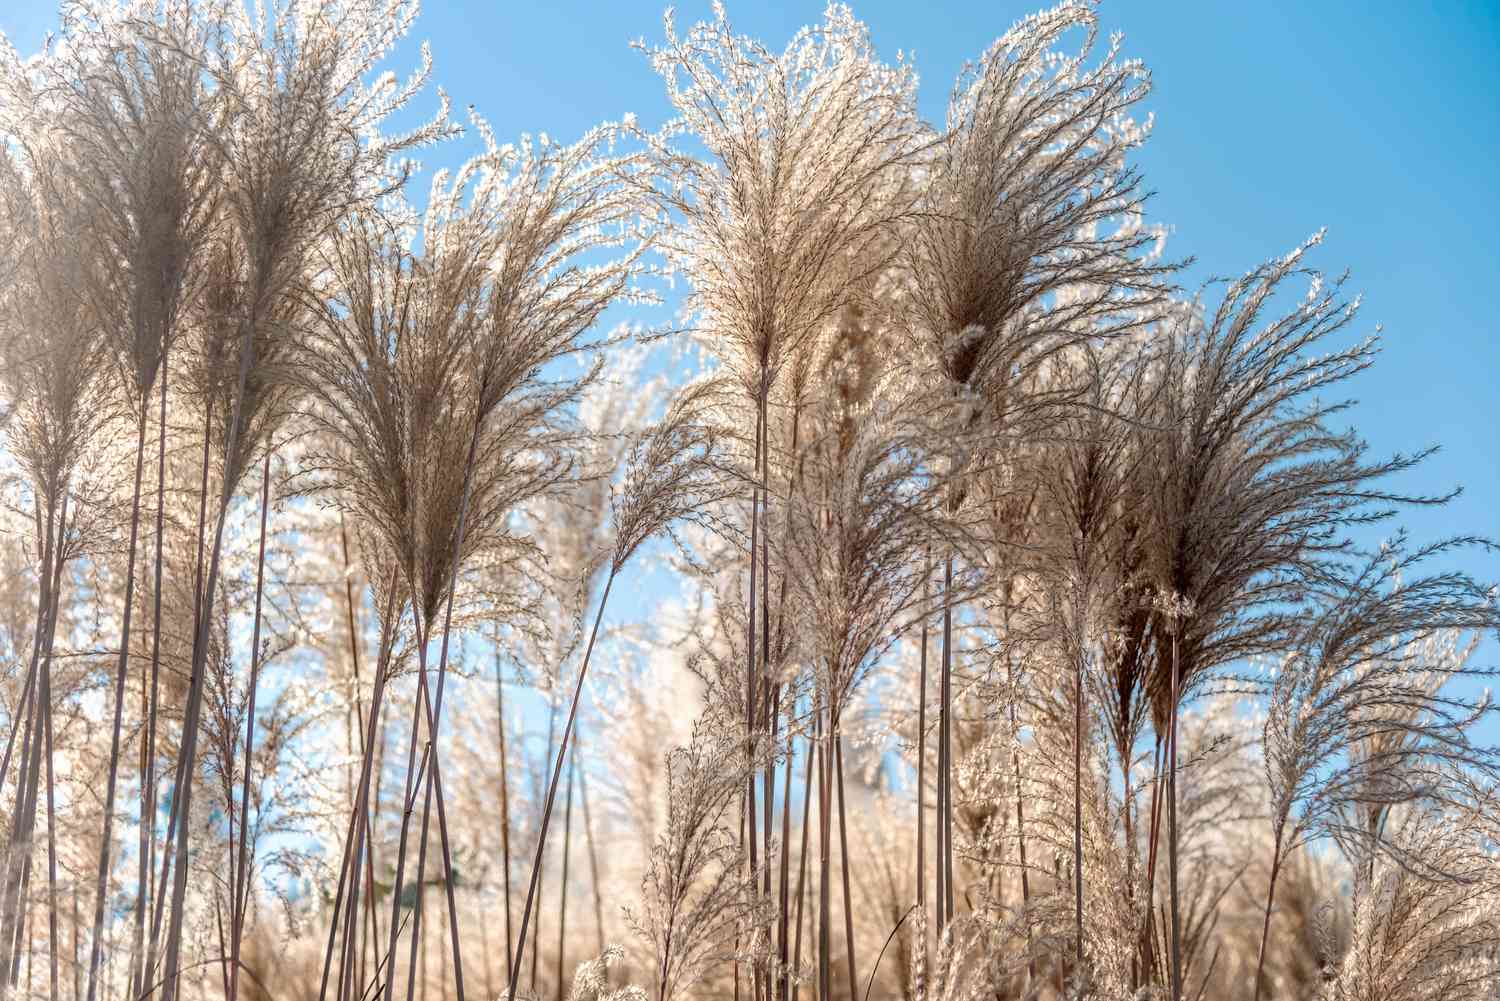 Tall silvergrass plumes with feathery flowers against blue sky